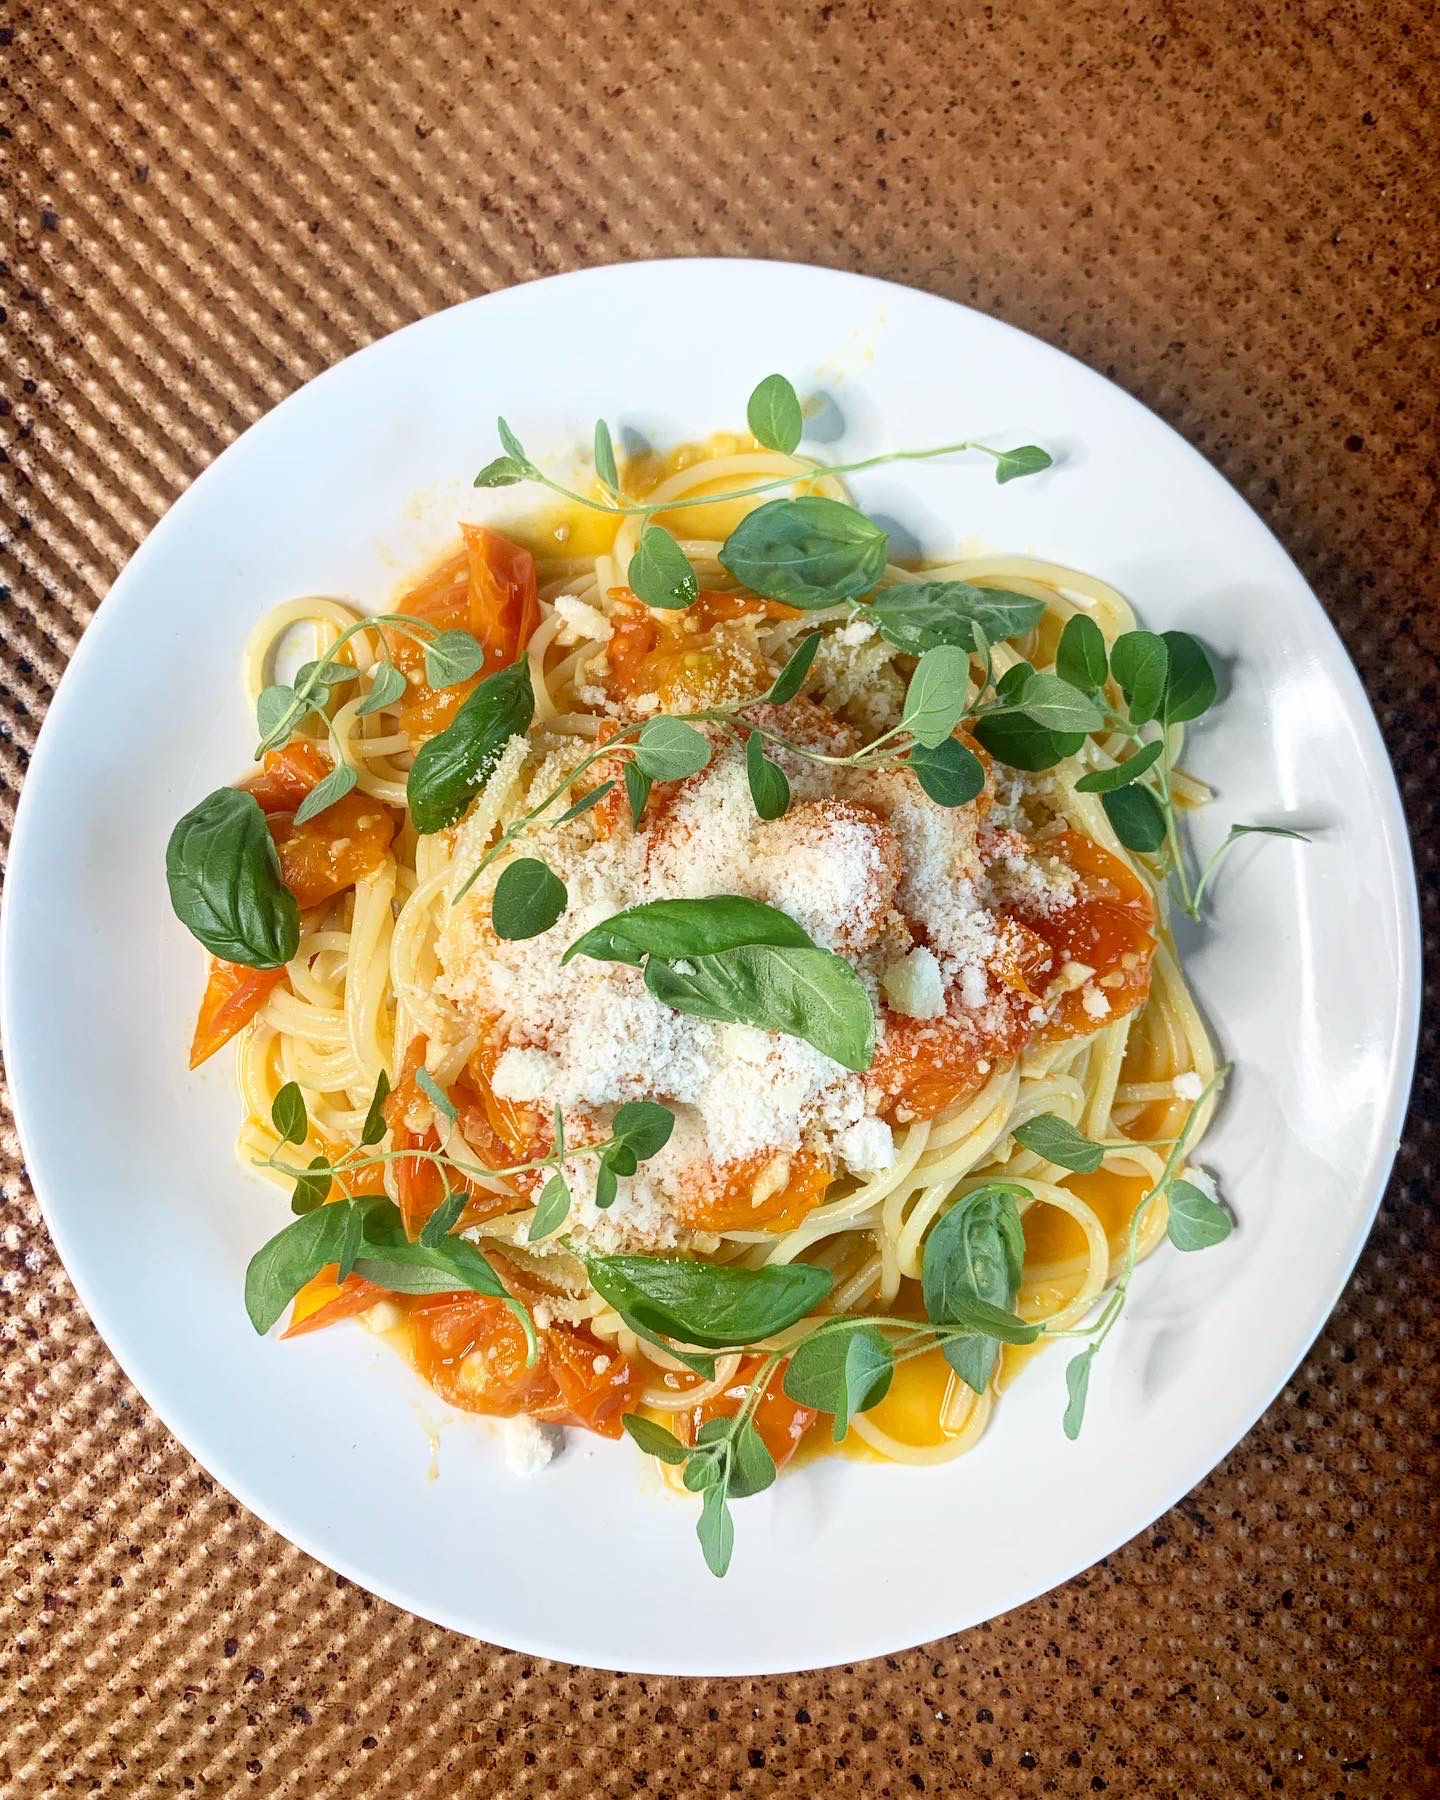 Spaghetti with Burst Cherry Tomato Sauce and sprigs of Fresh herbs